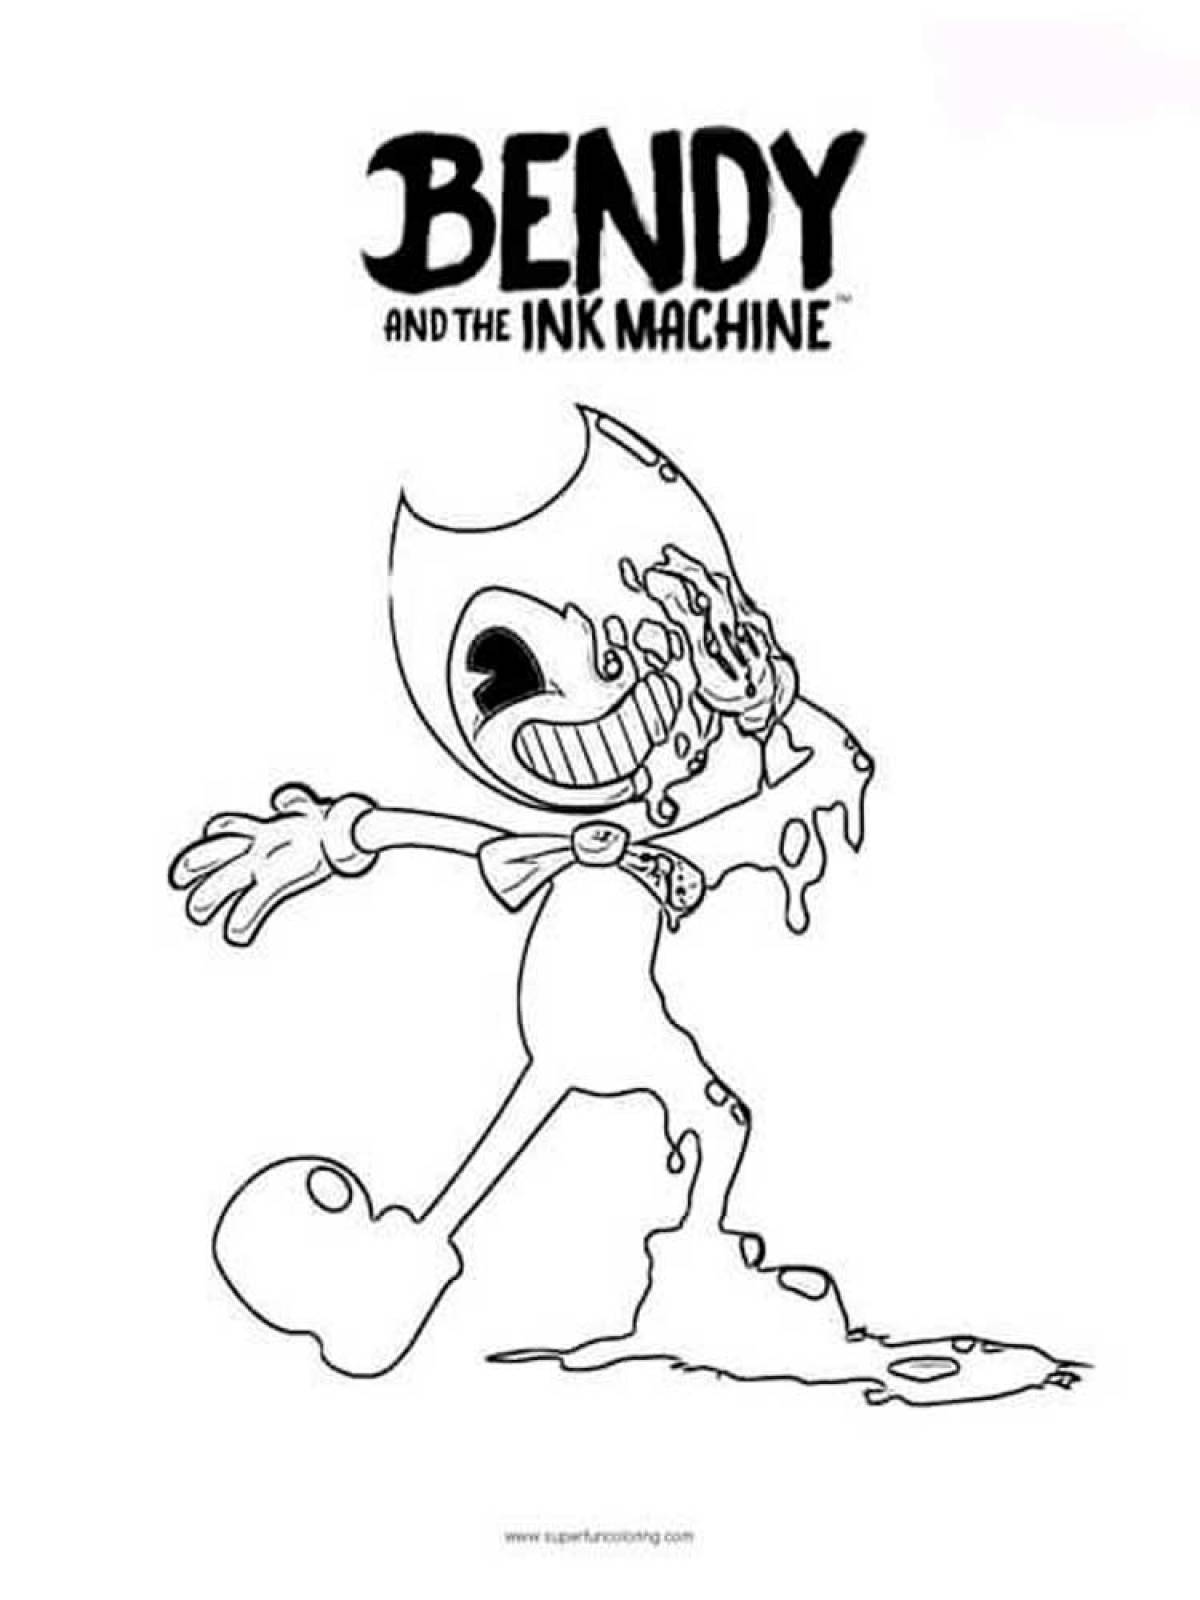 Photo Boys, Bendy and the Ink Machine #1